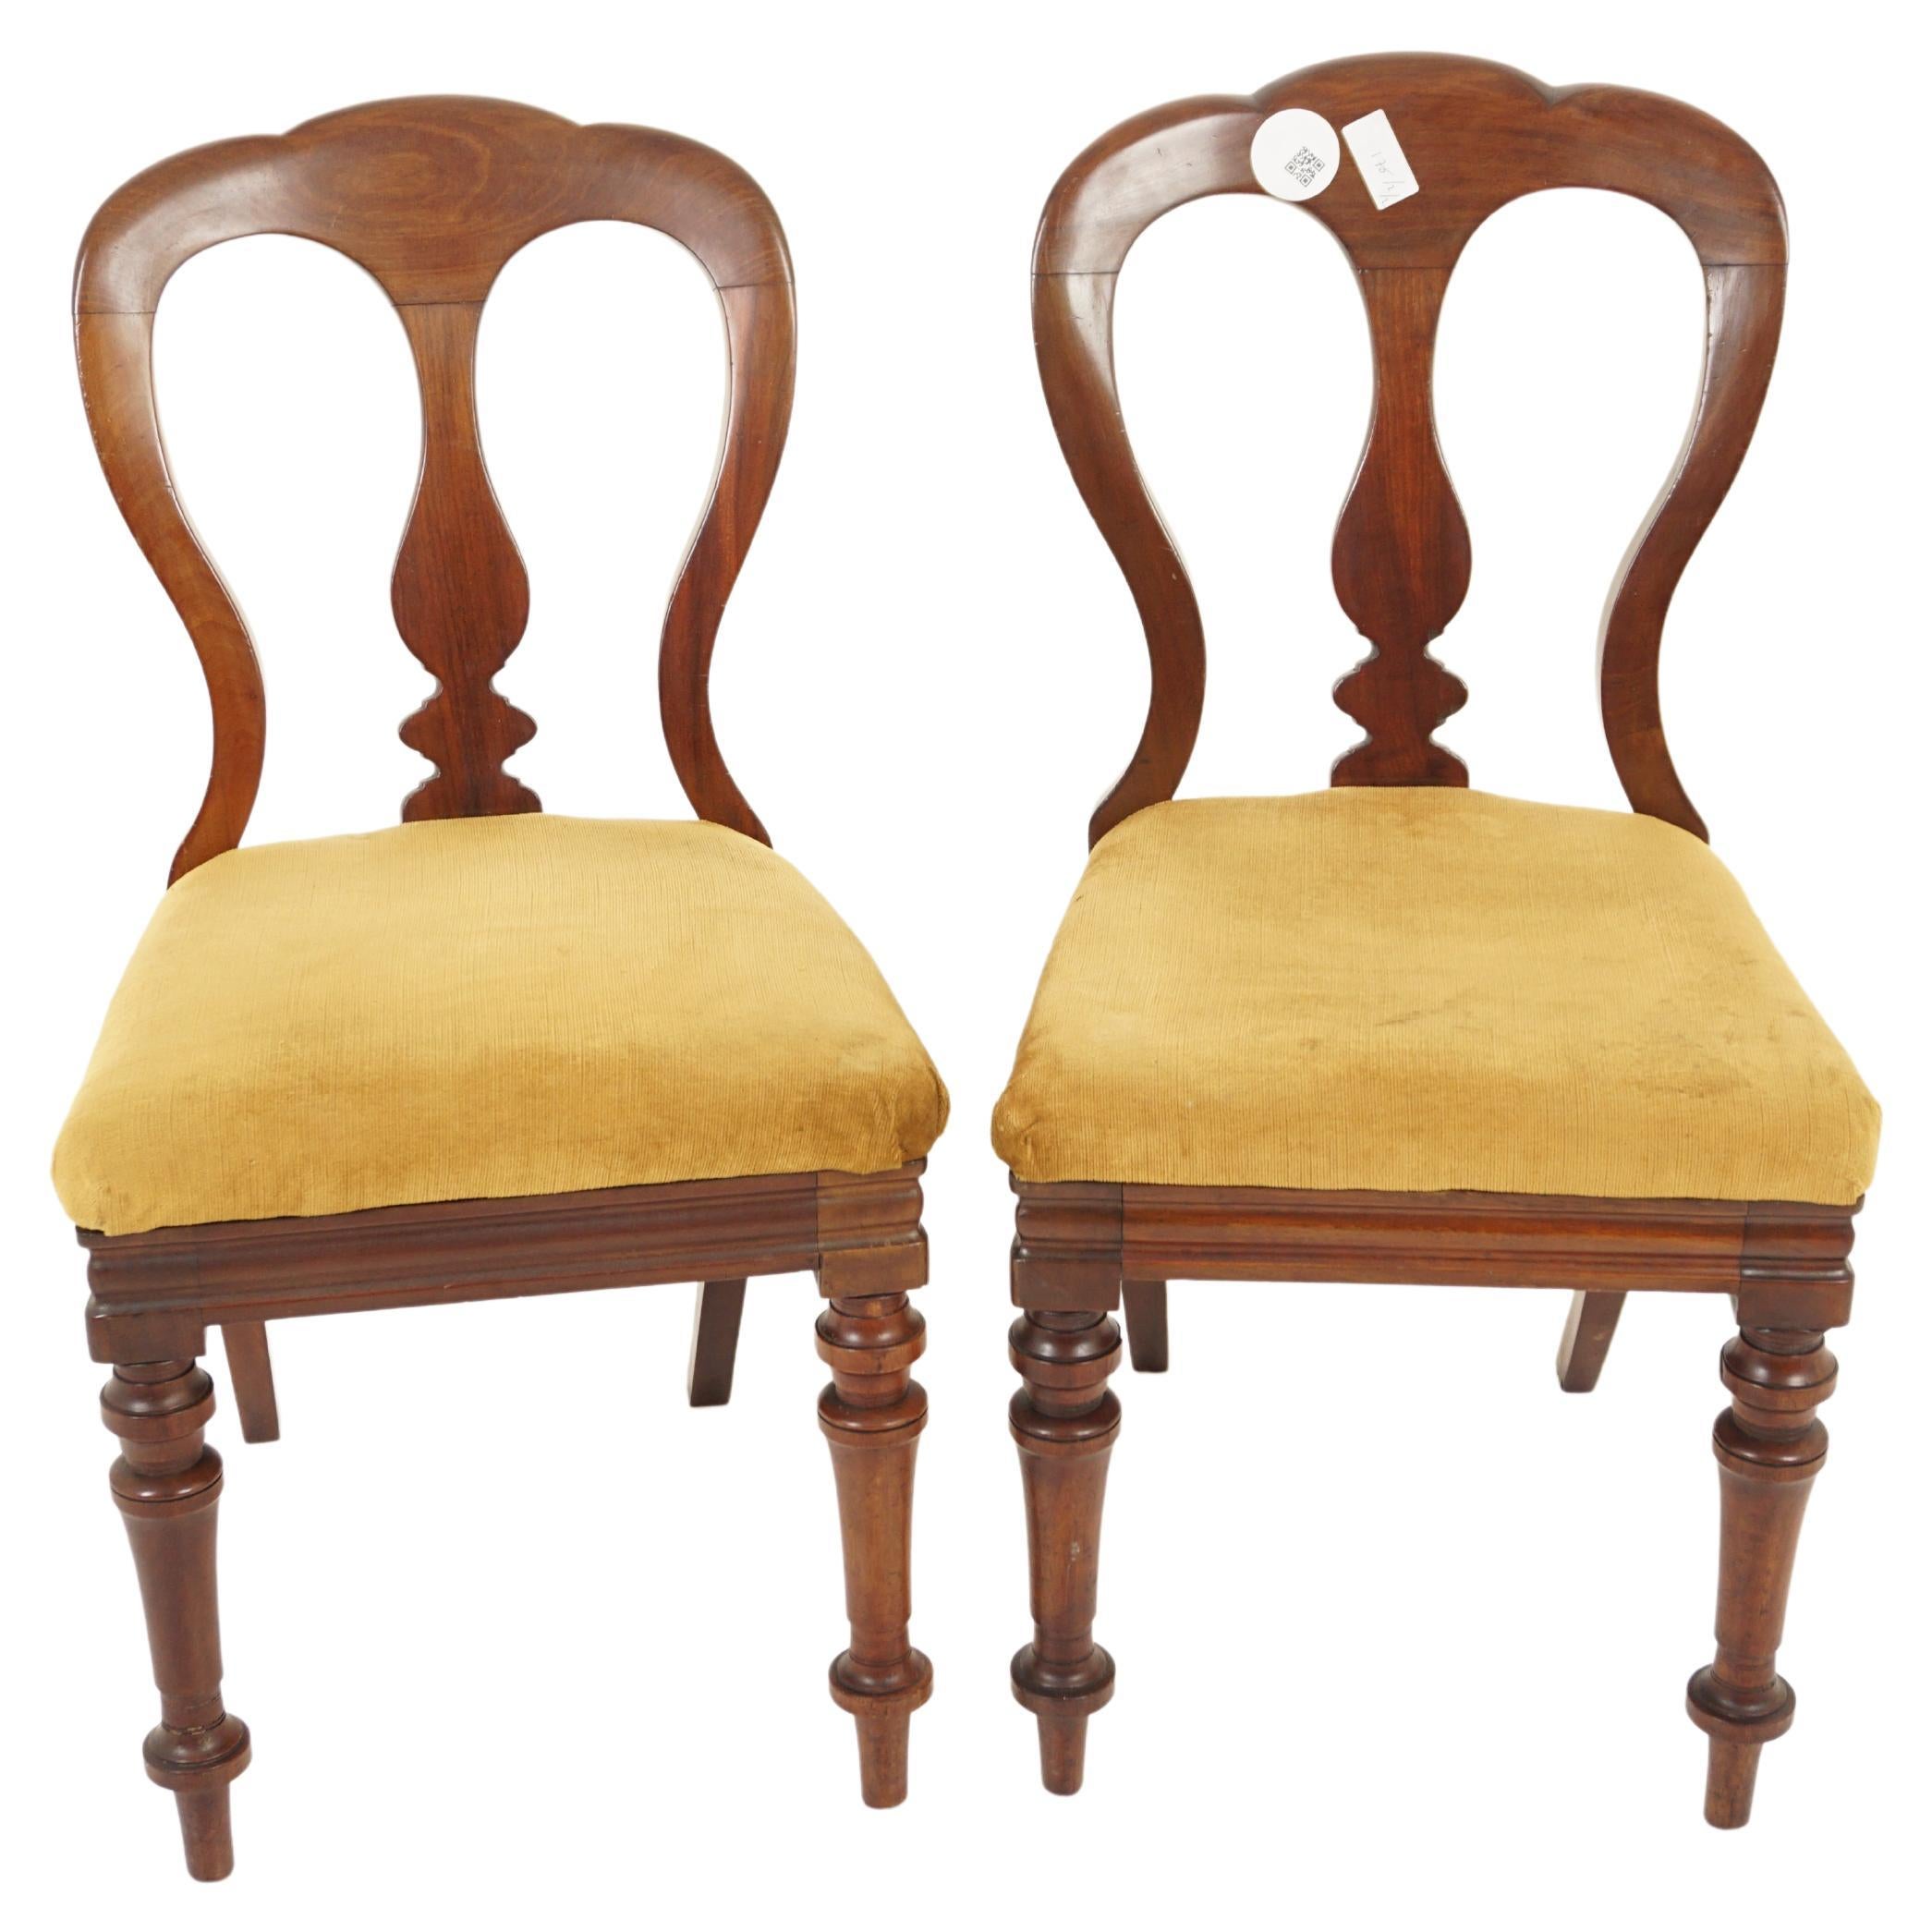 Antique Walnut Chairs, Pair of Balloon Back Dining Chairs, Scotland 1880, H1133